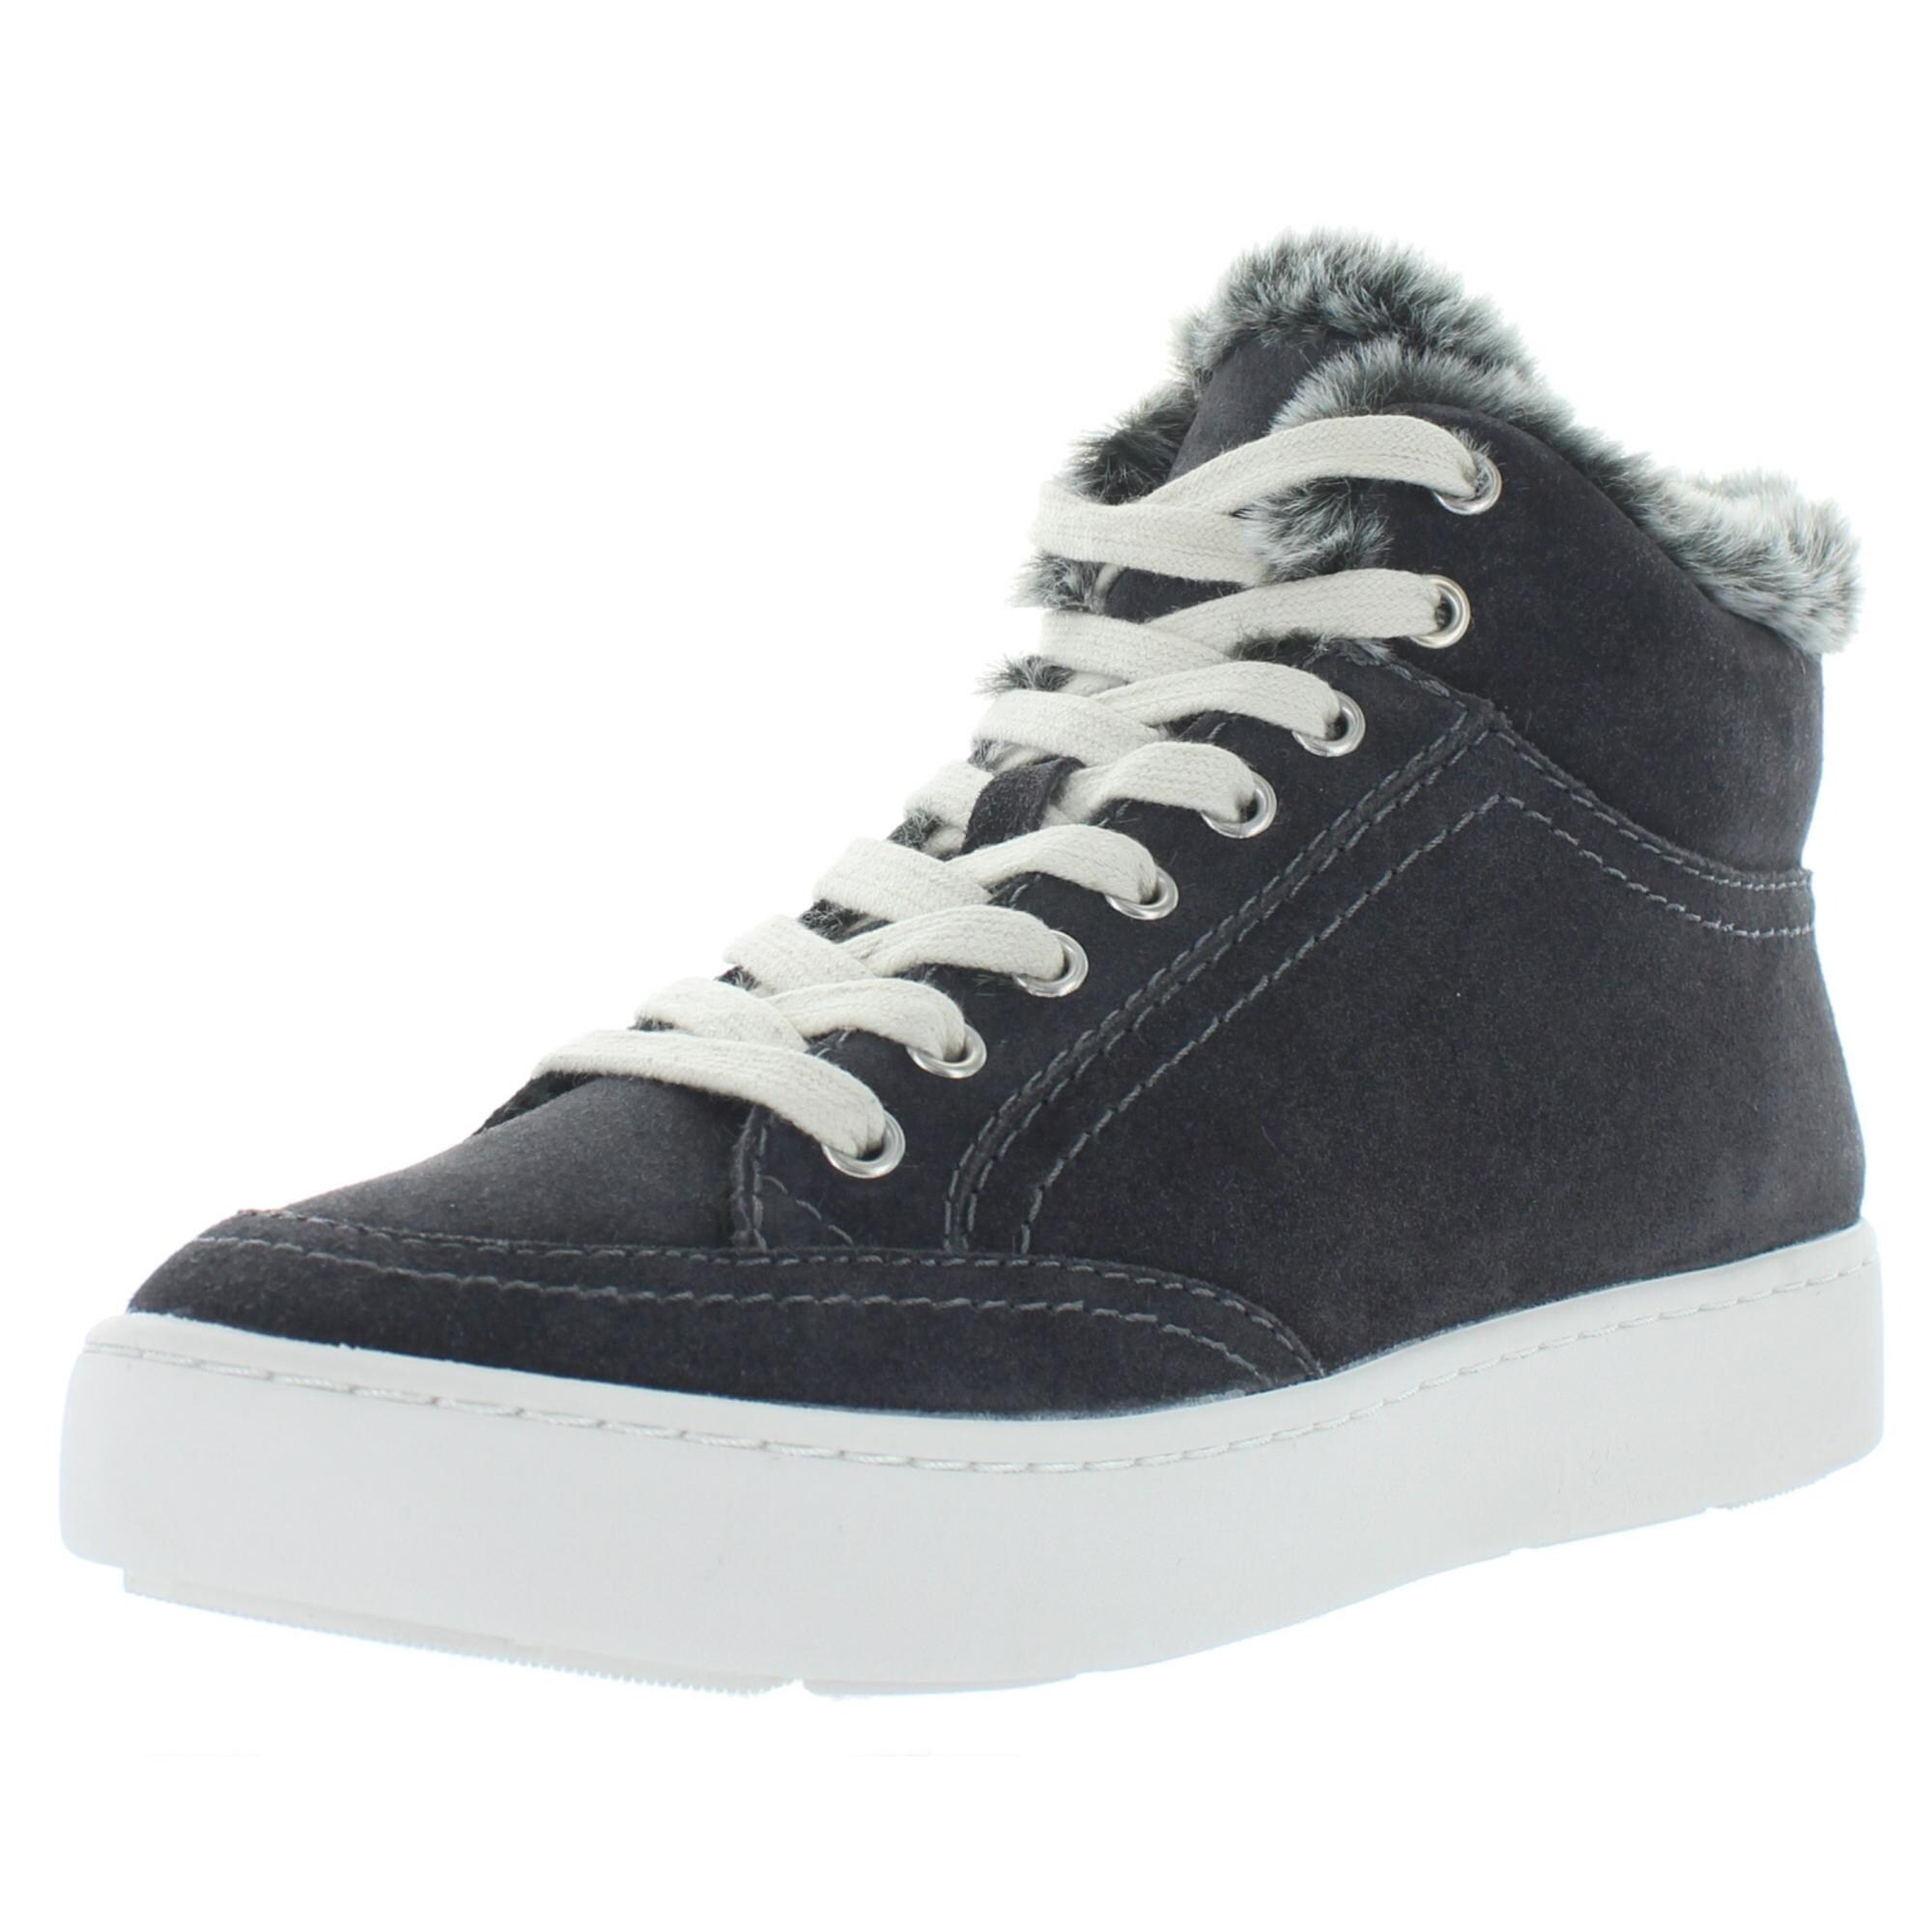 dolce vita high top suede sneakers